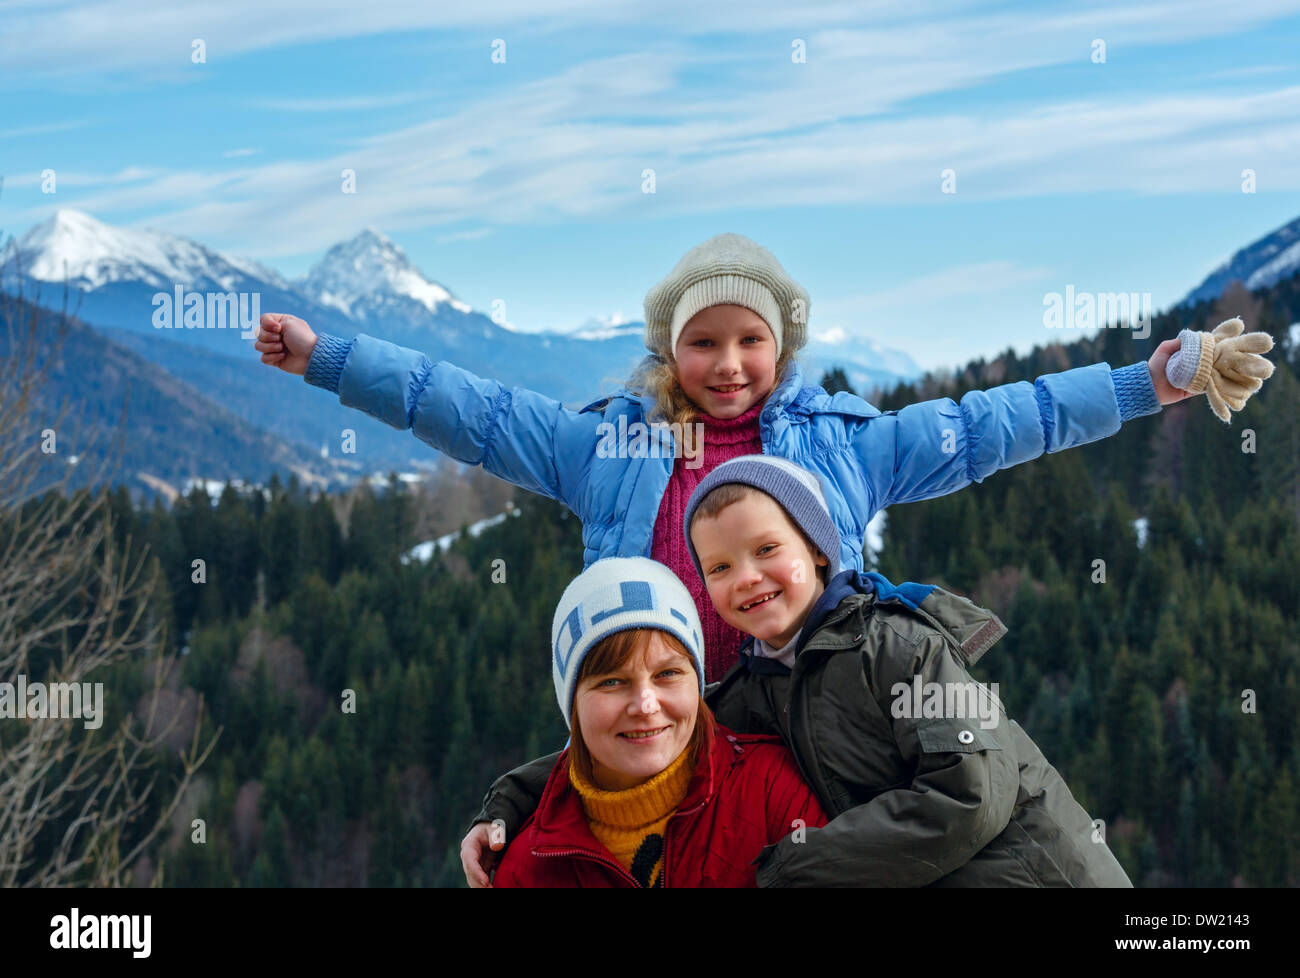 Family and winter mountain landscape Stock Photo